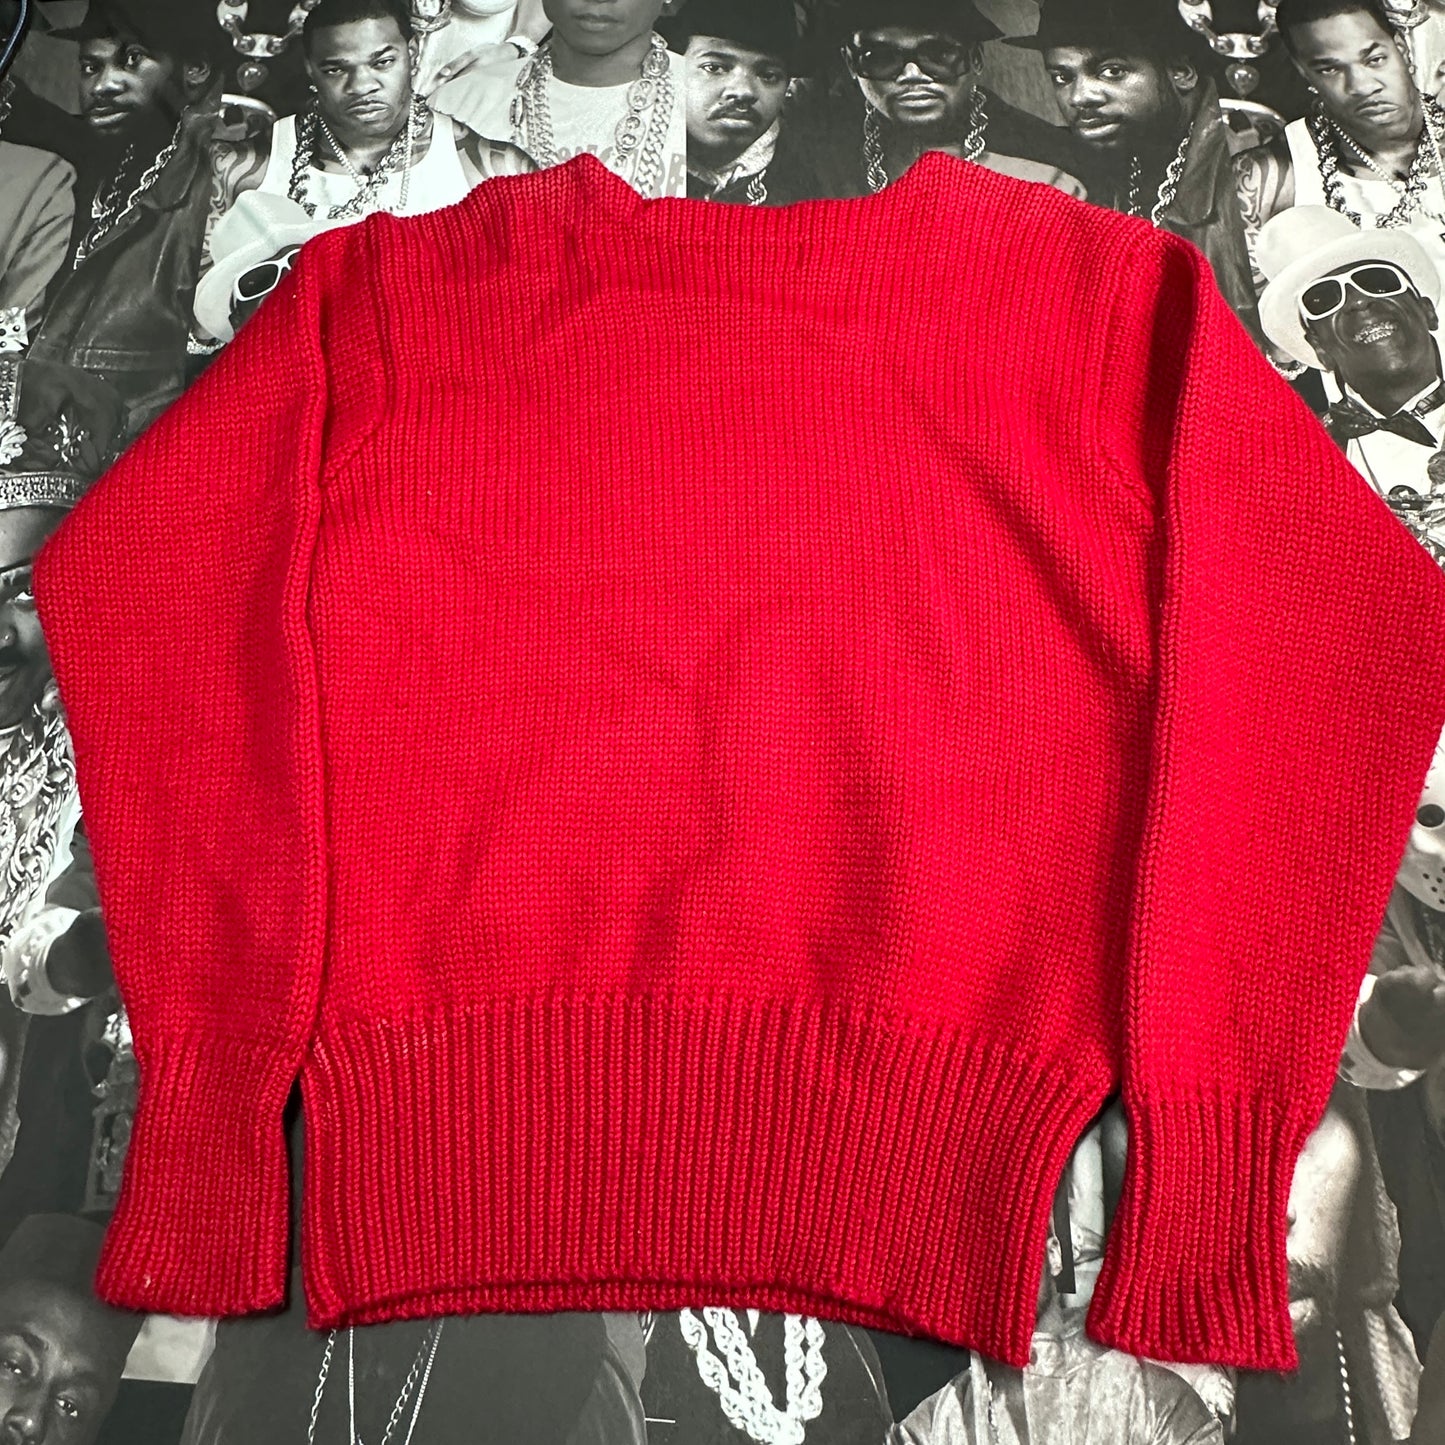 Vintage 80's Polo Ralph Lauren Knit Wool Sweater Size Small